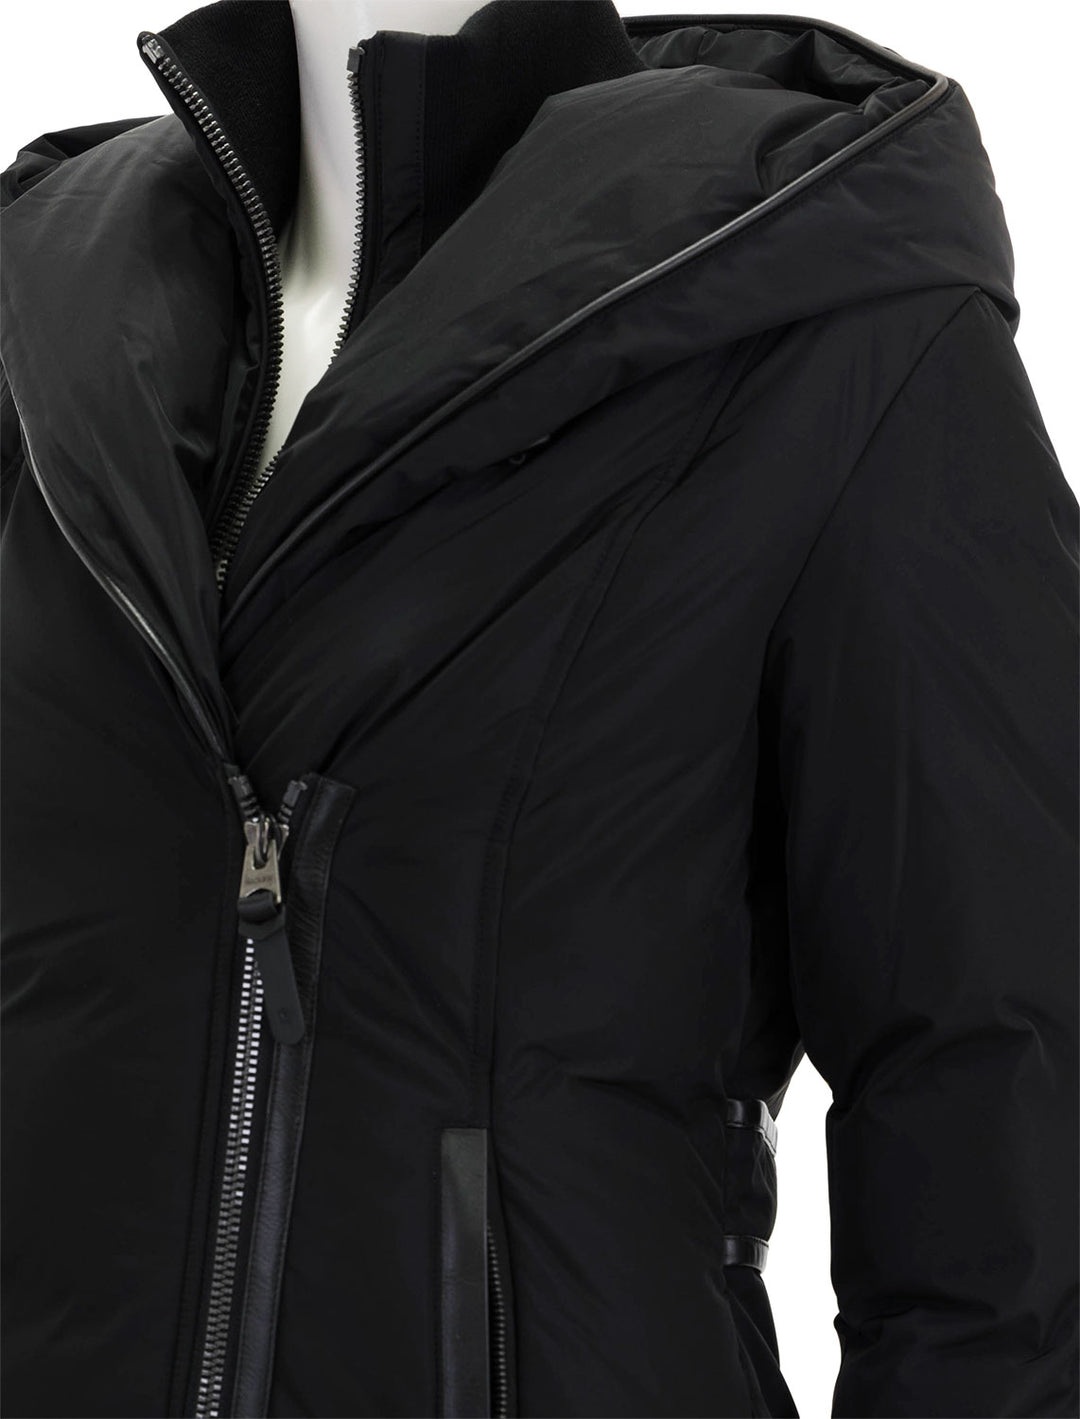 Close-up view of Mackage's kay in black.